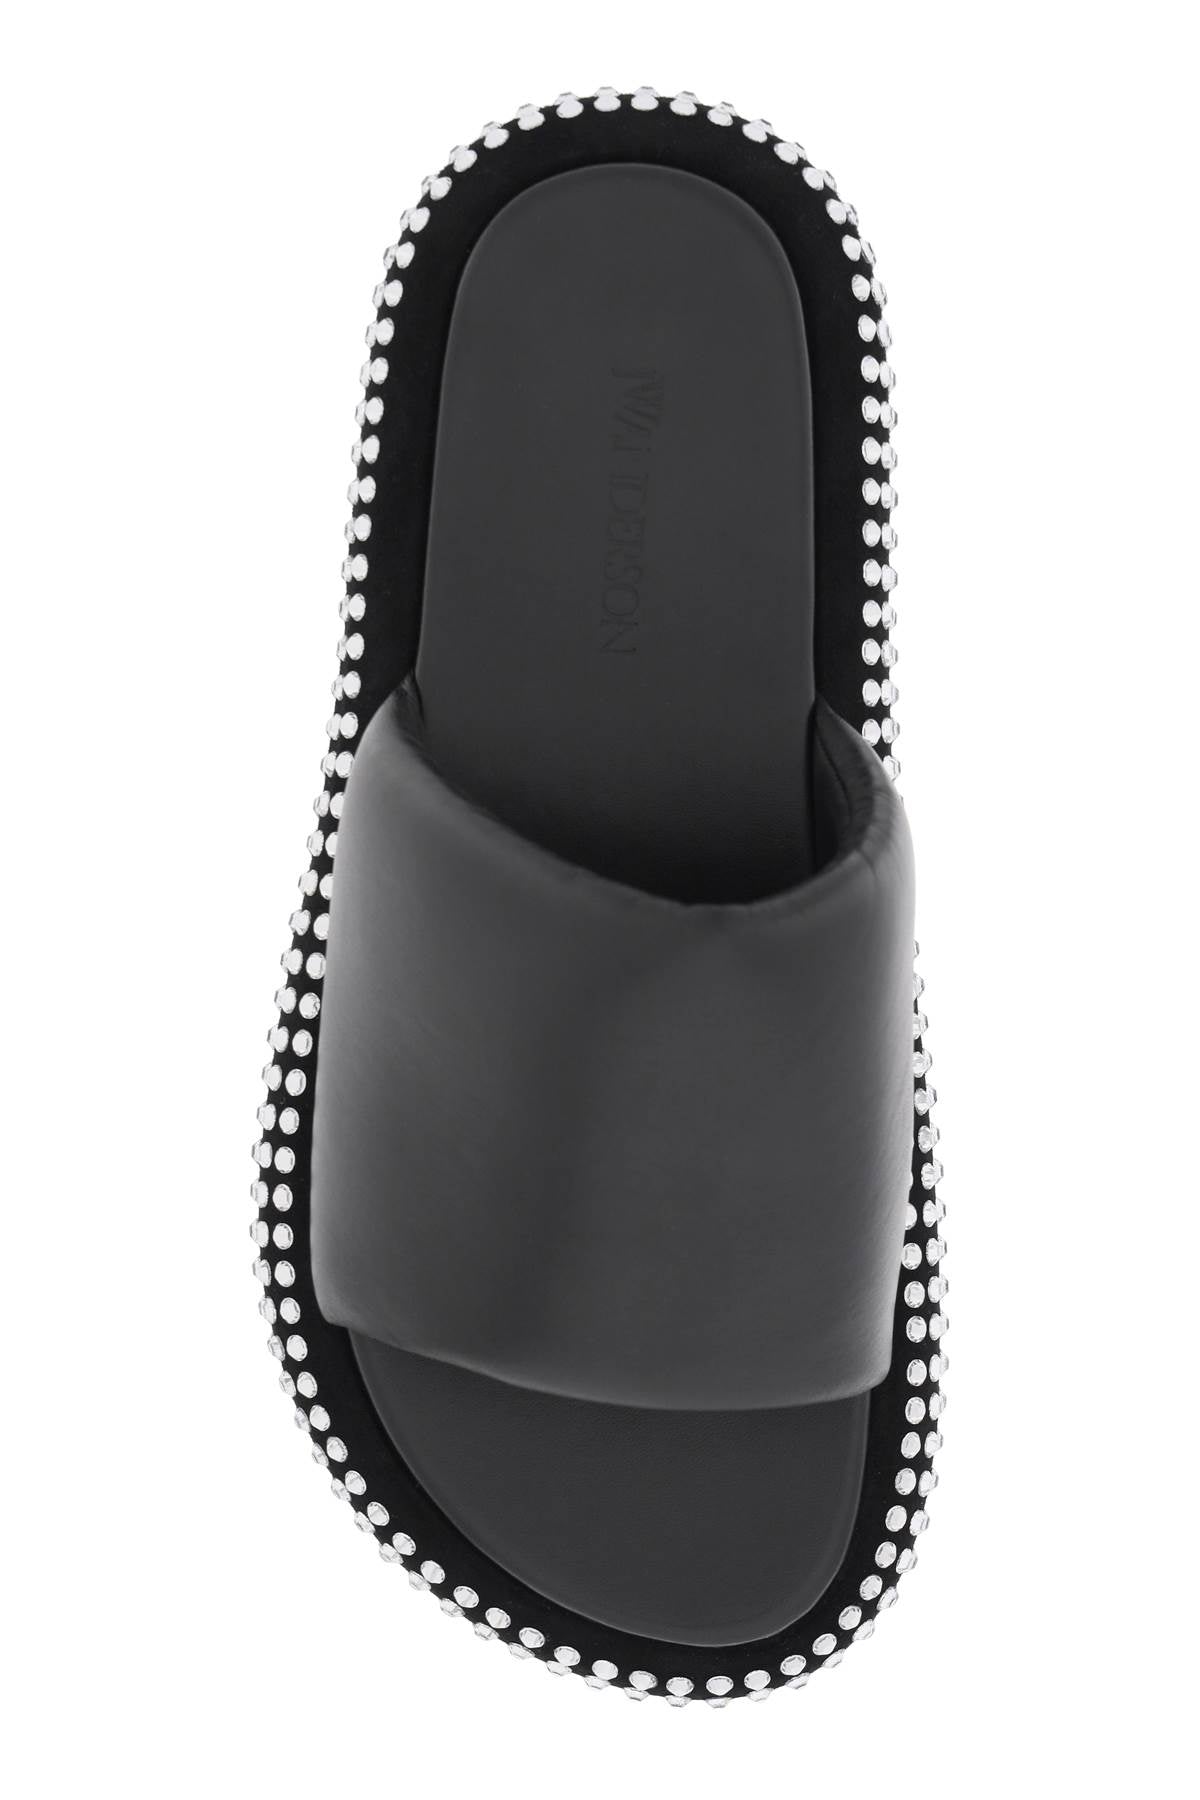 JW ANDERSON 'Crystal Bumper' Black Slide Sandals for Women from J.W. Anderson